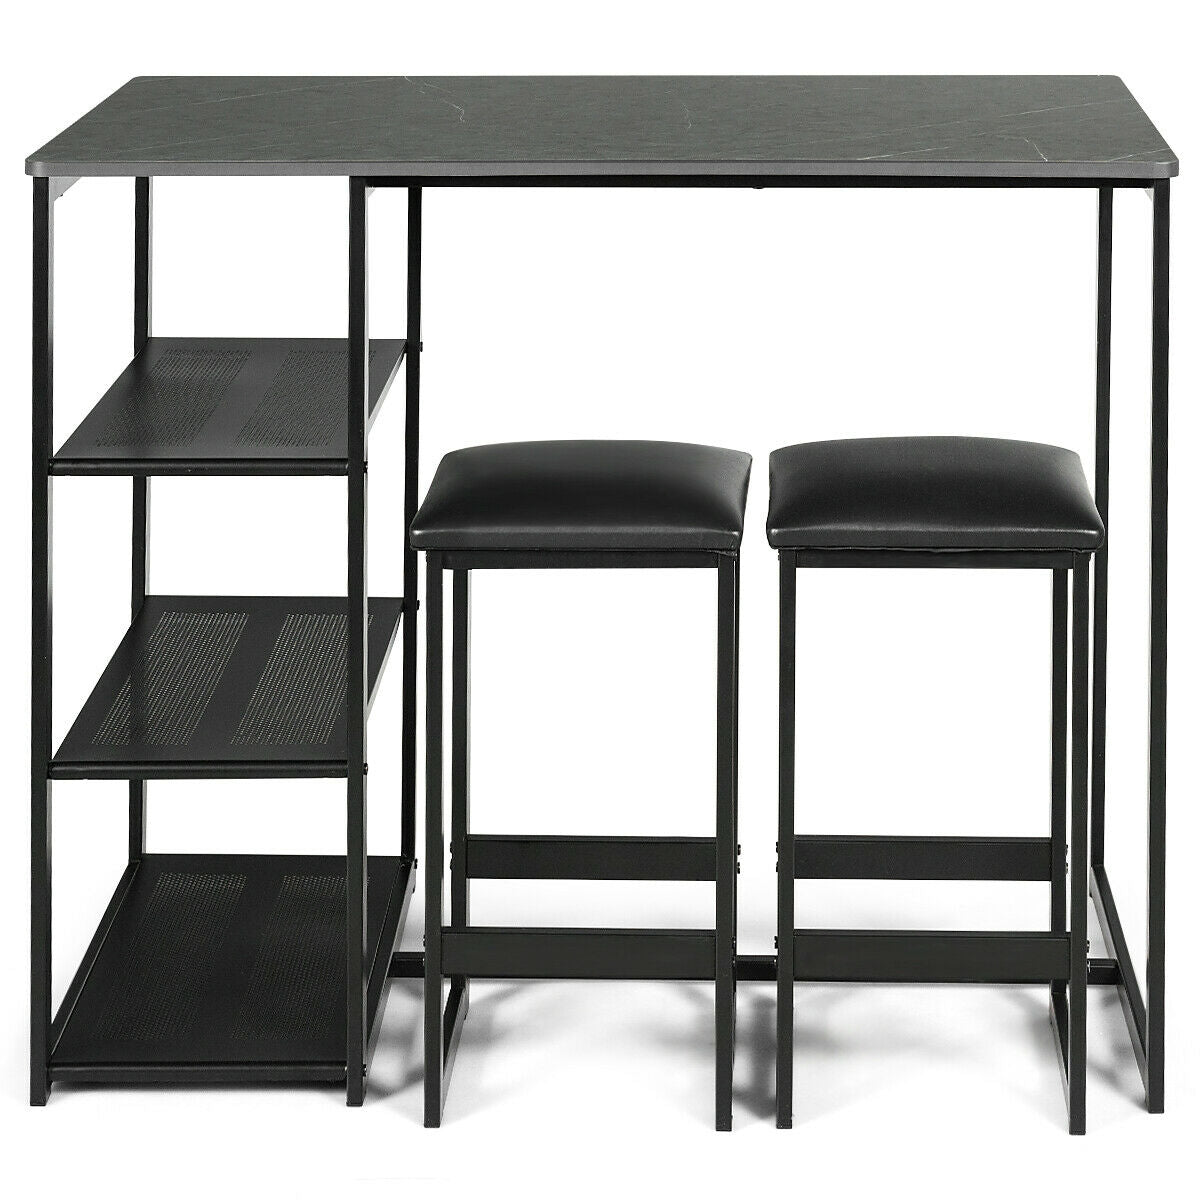 3 pcs Dining Set with Faux Marble Top Table and 2 Stools-Black